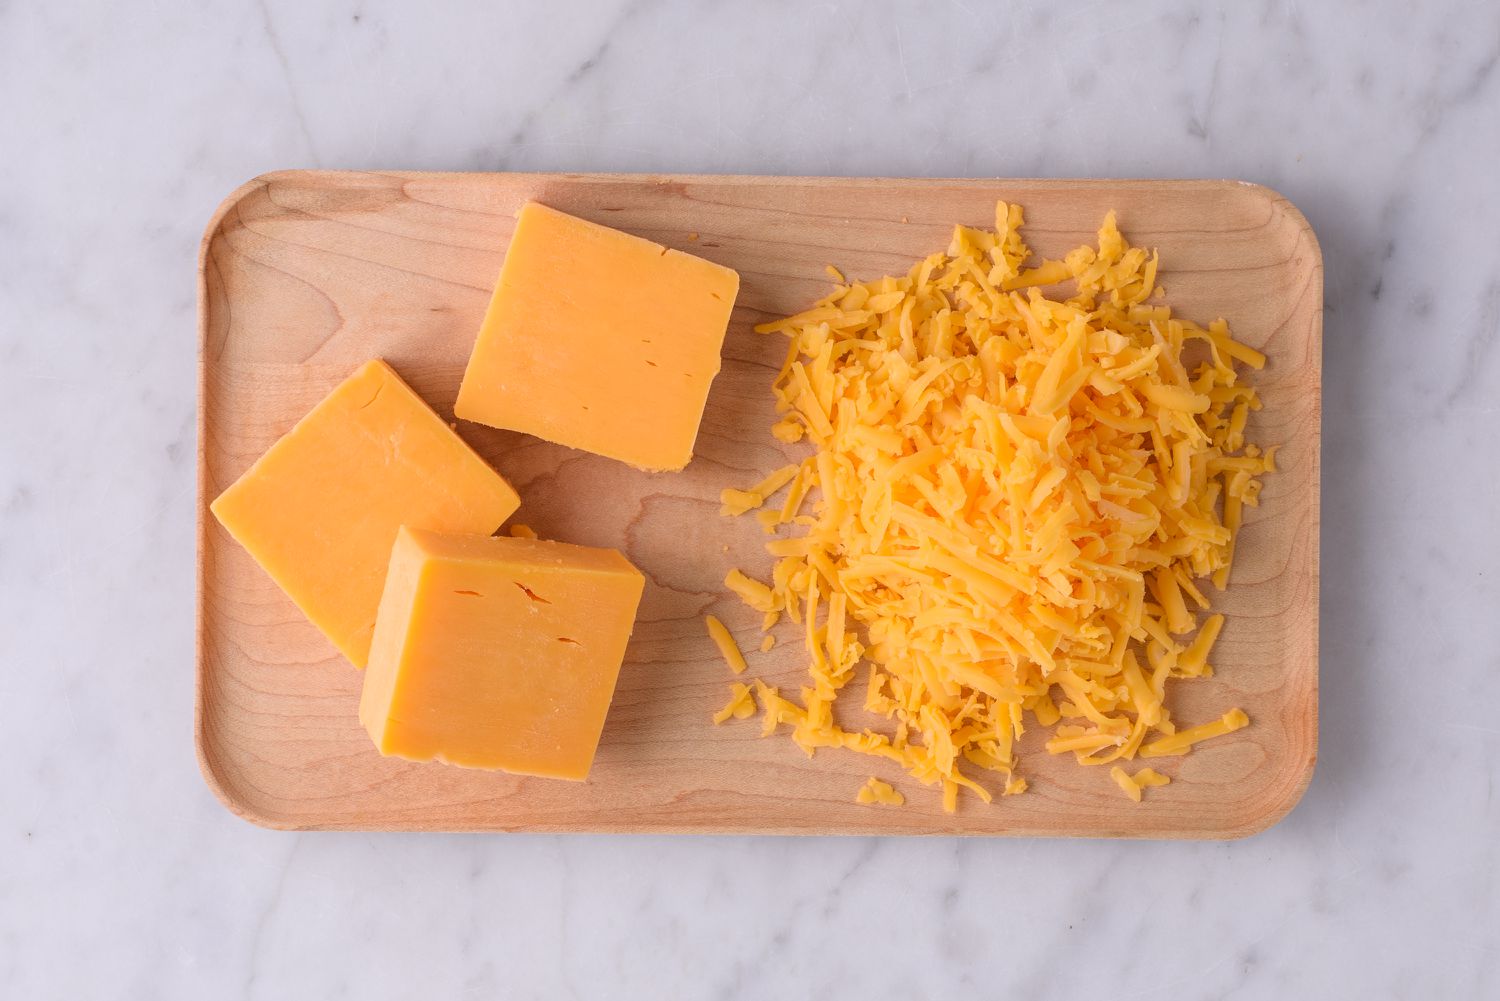 How To Store Cheddar Cheese In Fridge